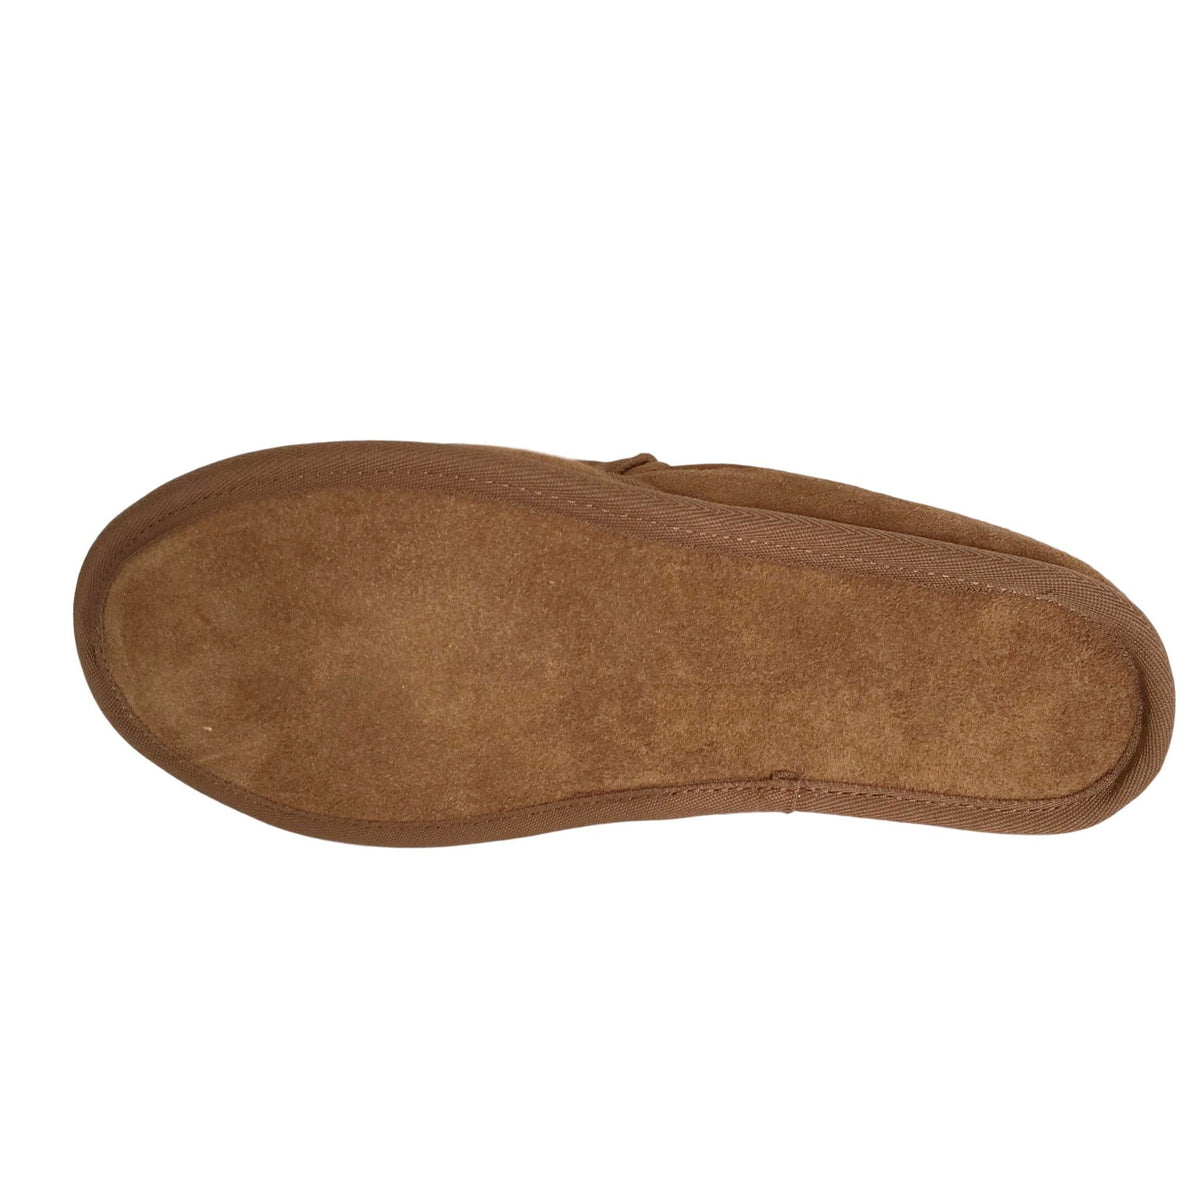 Deluxe Mens 'Liam' Sheepskin Slippers with Soft Sole - Chestnut ...